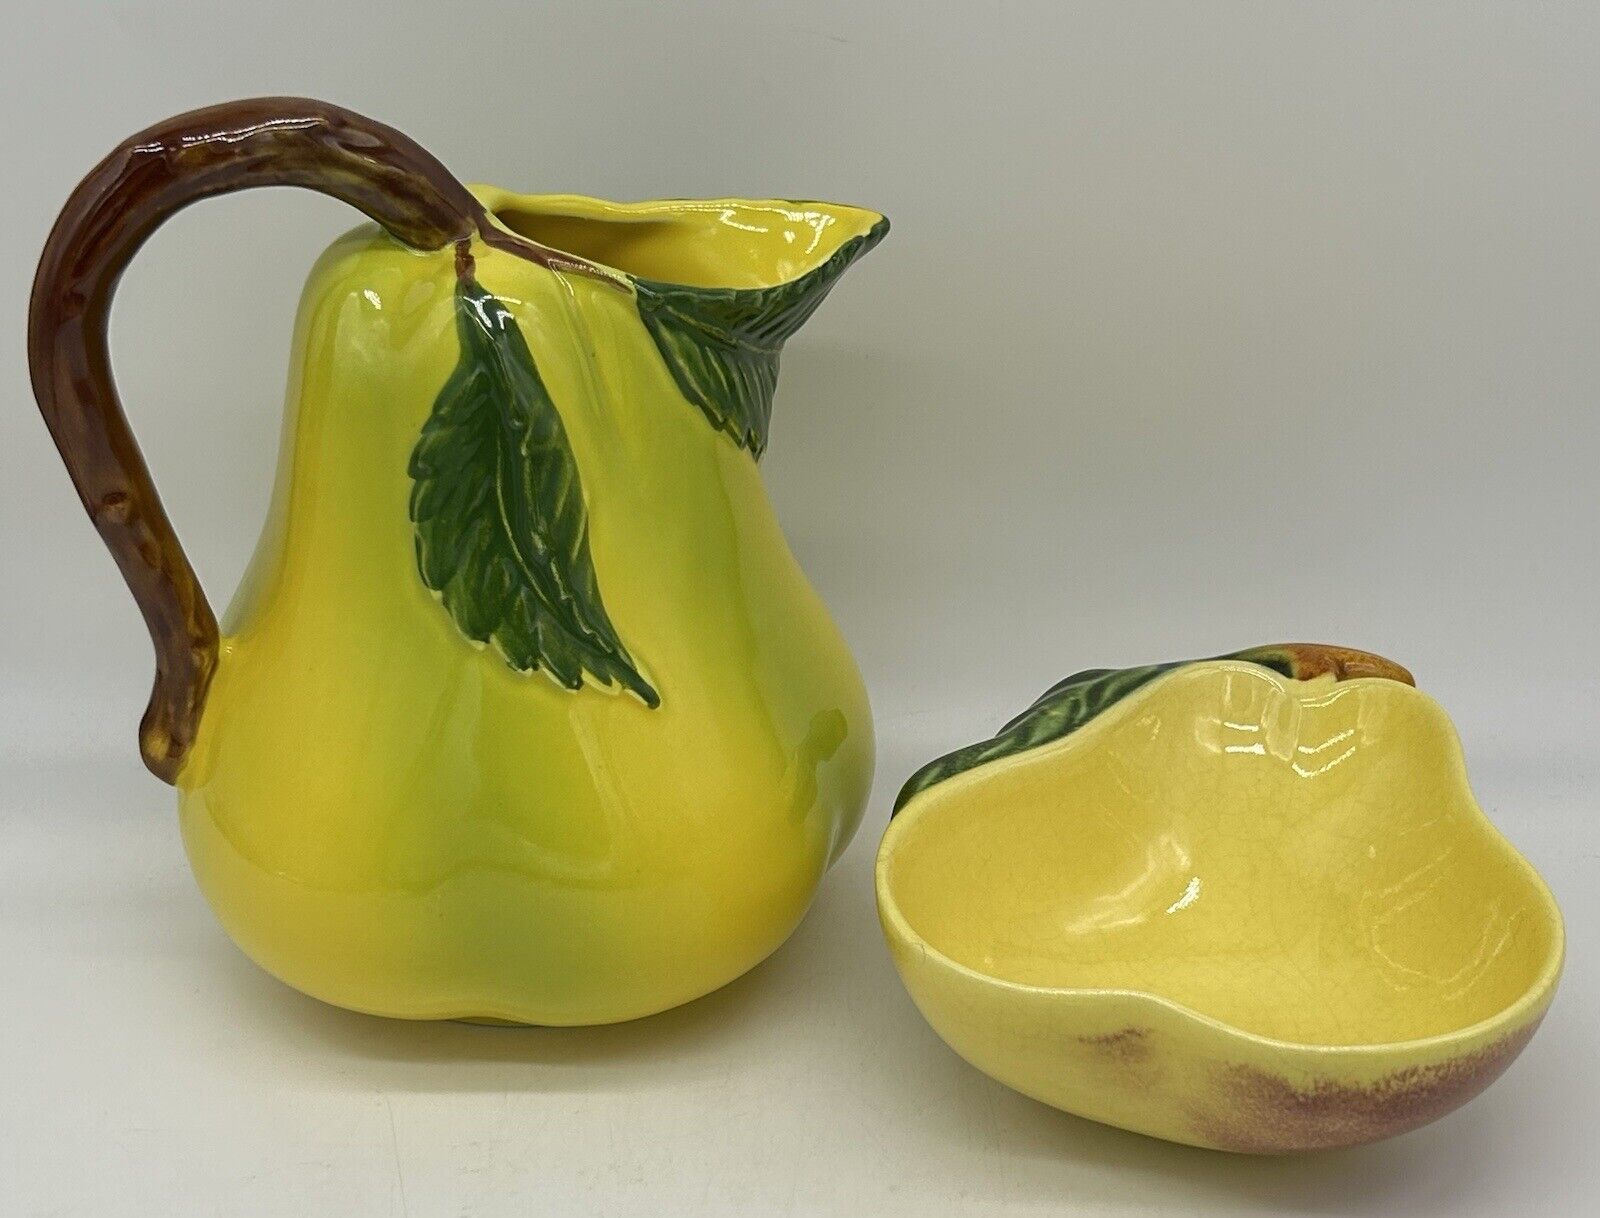 Vintage Pear Shaped Pitcher & Bowl, Yellow, Made in Portugal